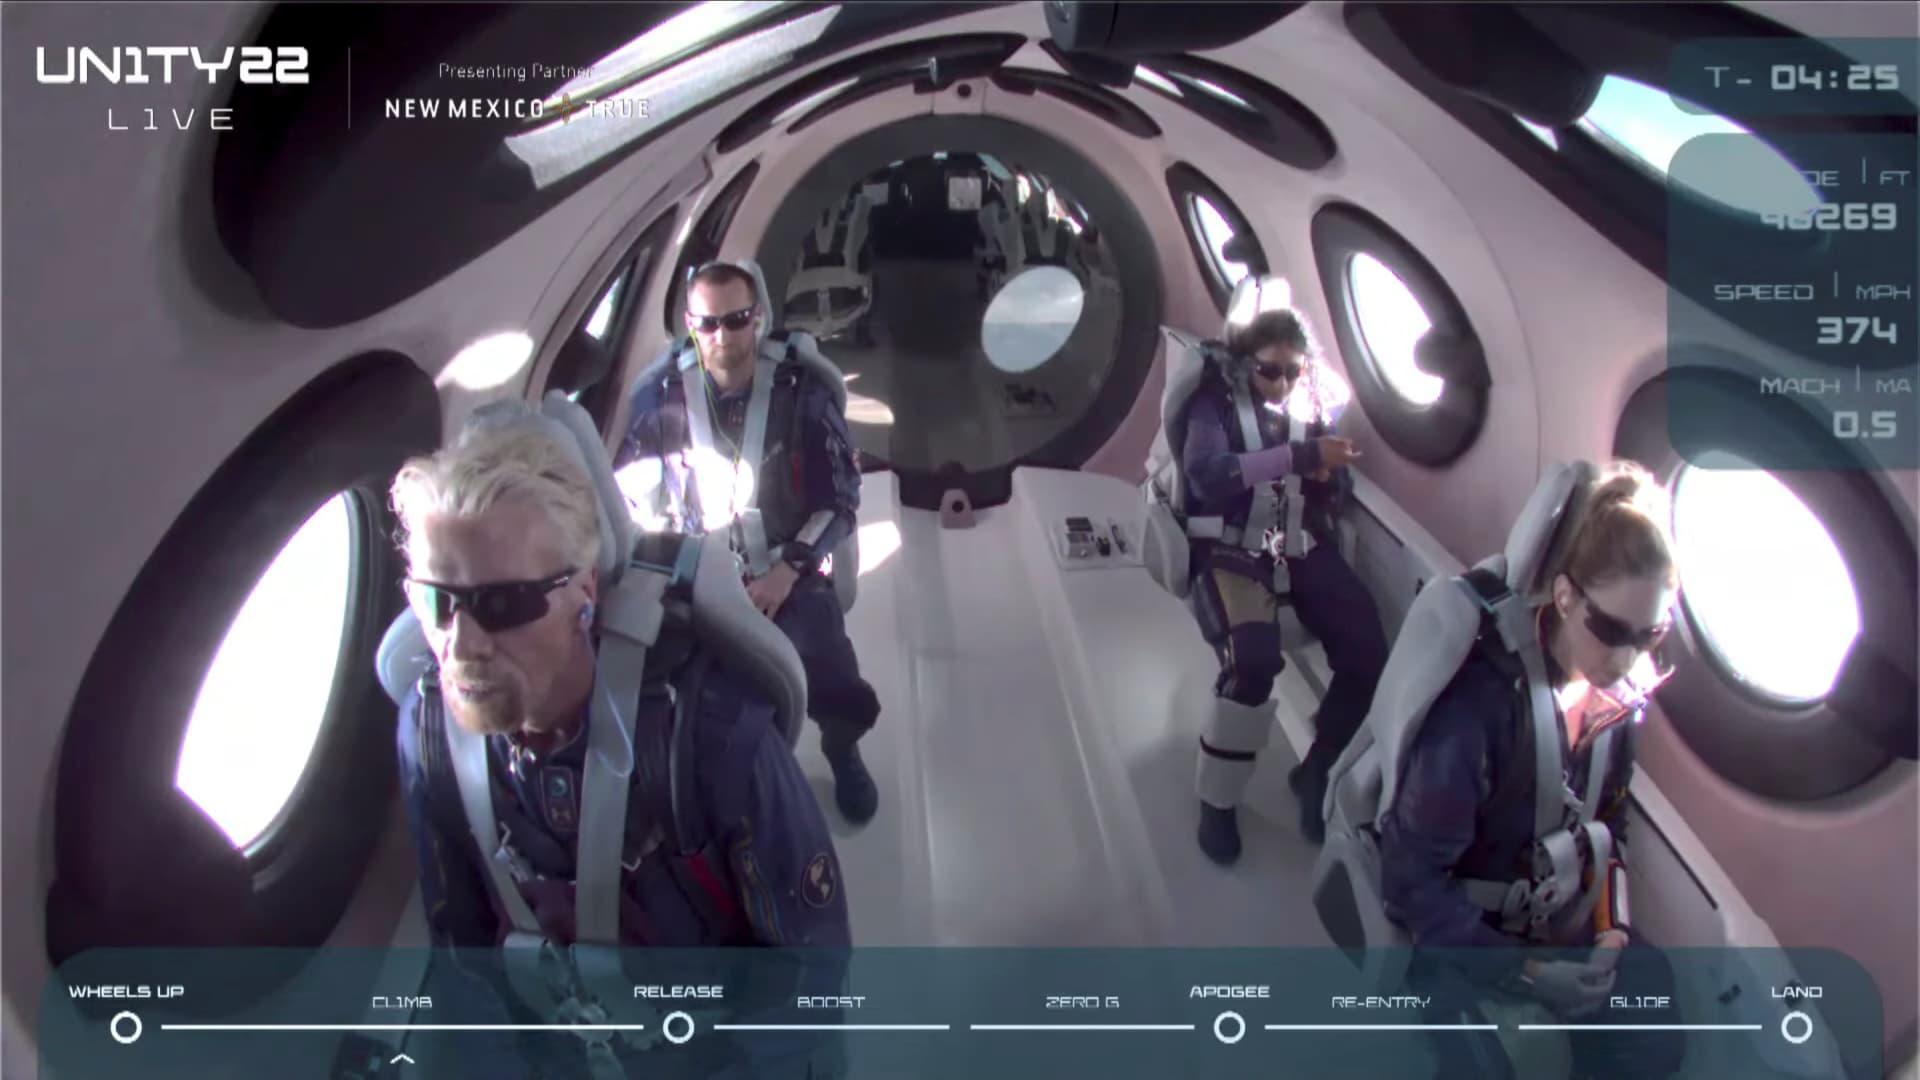 Billionaire Richard Branson and crew are seen on board Virgin Galactic's passenger rocket plane VSS Unity before starting their untethered ascent to the edge of space above Spaceport America near Truth or Consequences, New Mexico, U.S. July 11, 2021 in a still image from video.